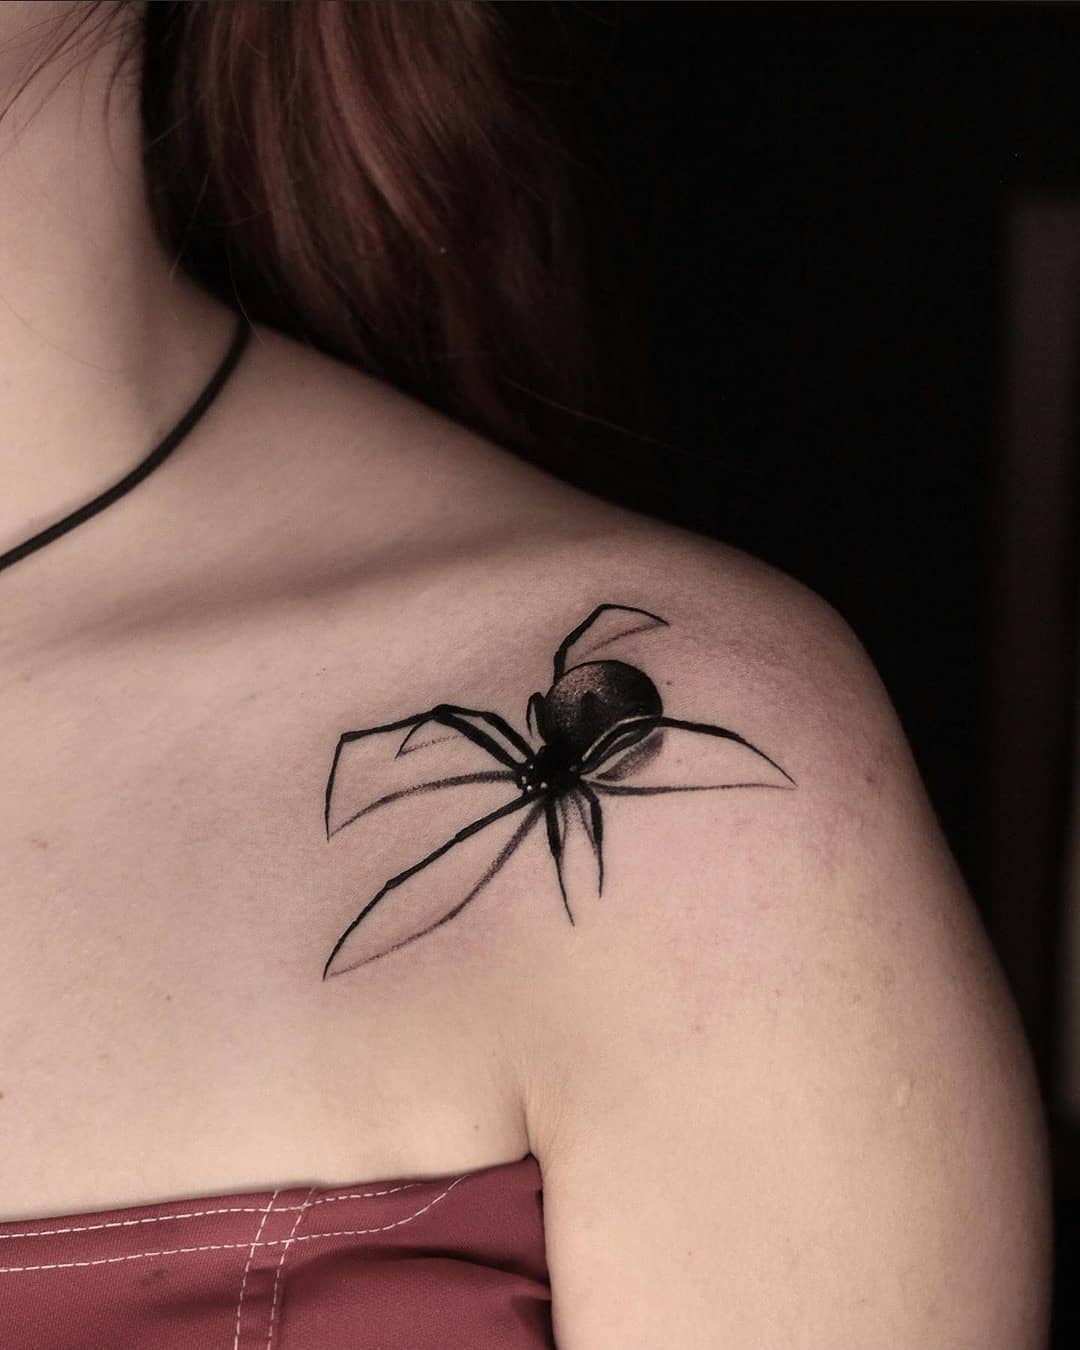 Beautiful spider on the shoulder by Liz!!!! She has a couple of gaps next week to fill... enquire within!
